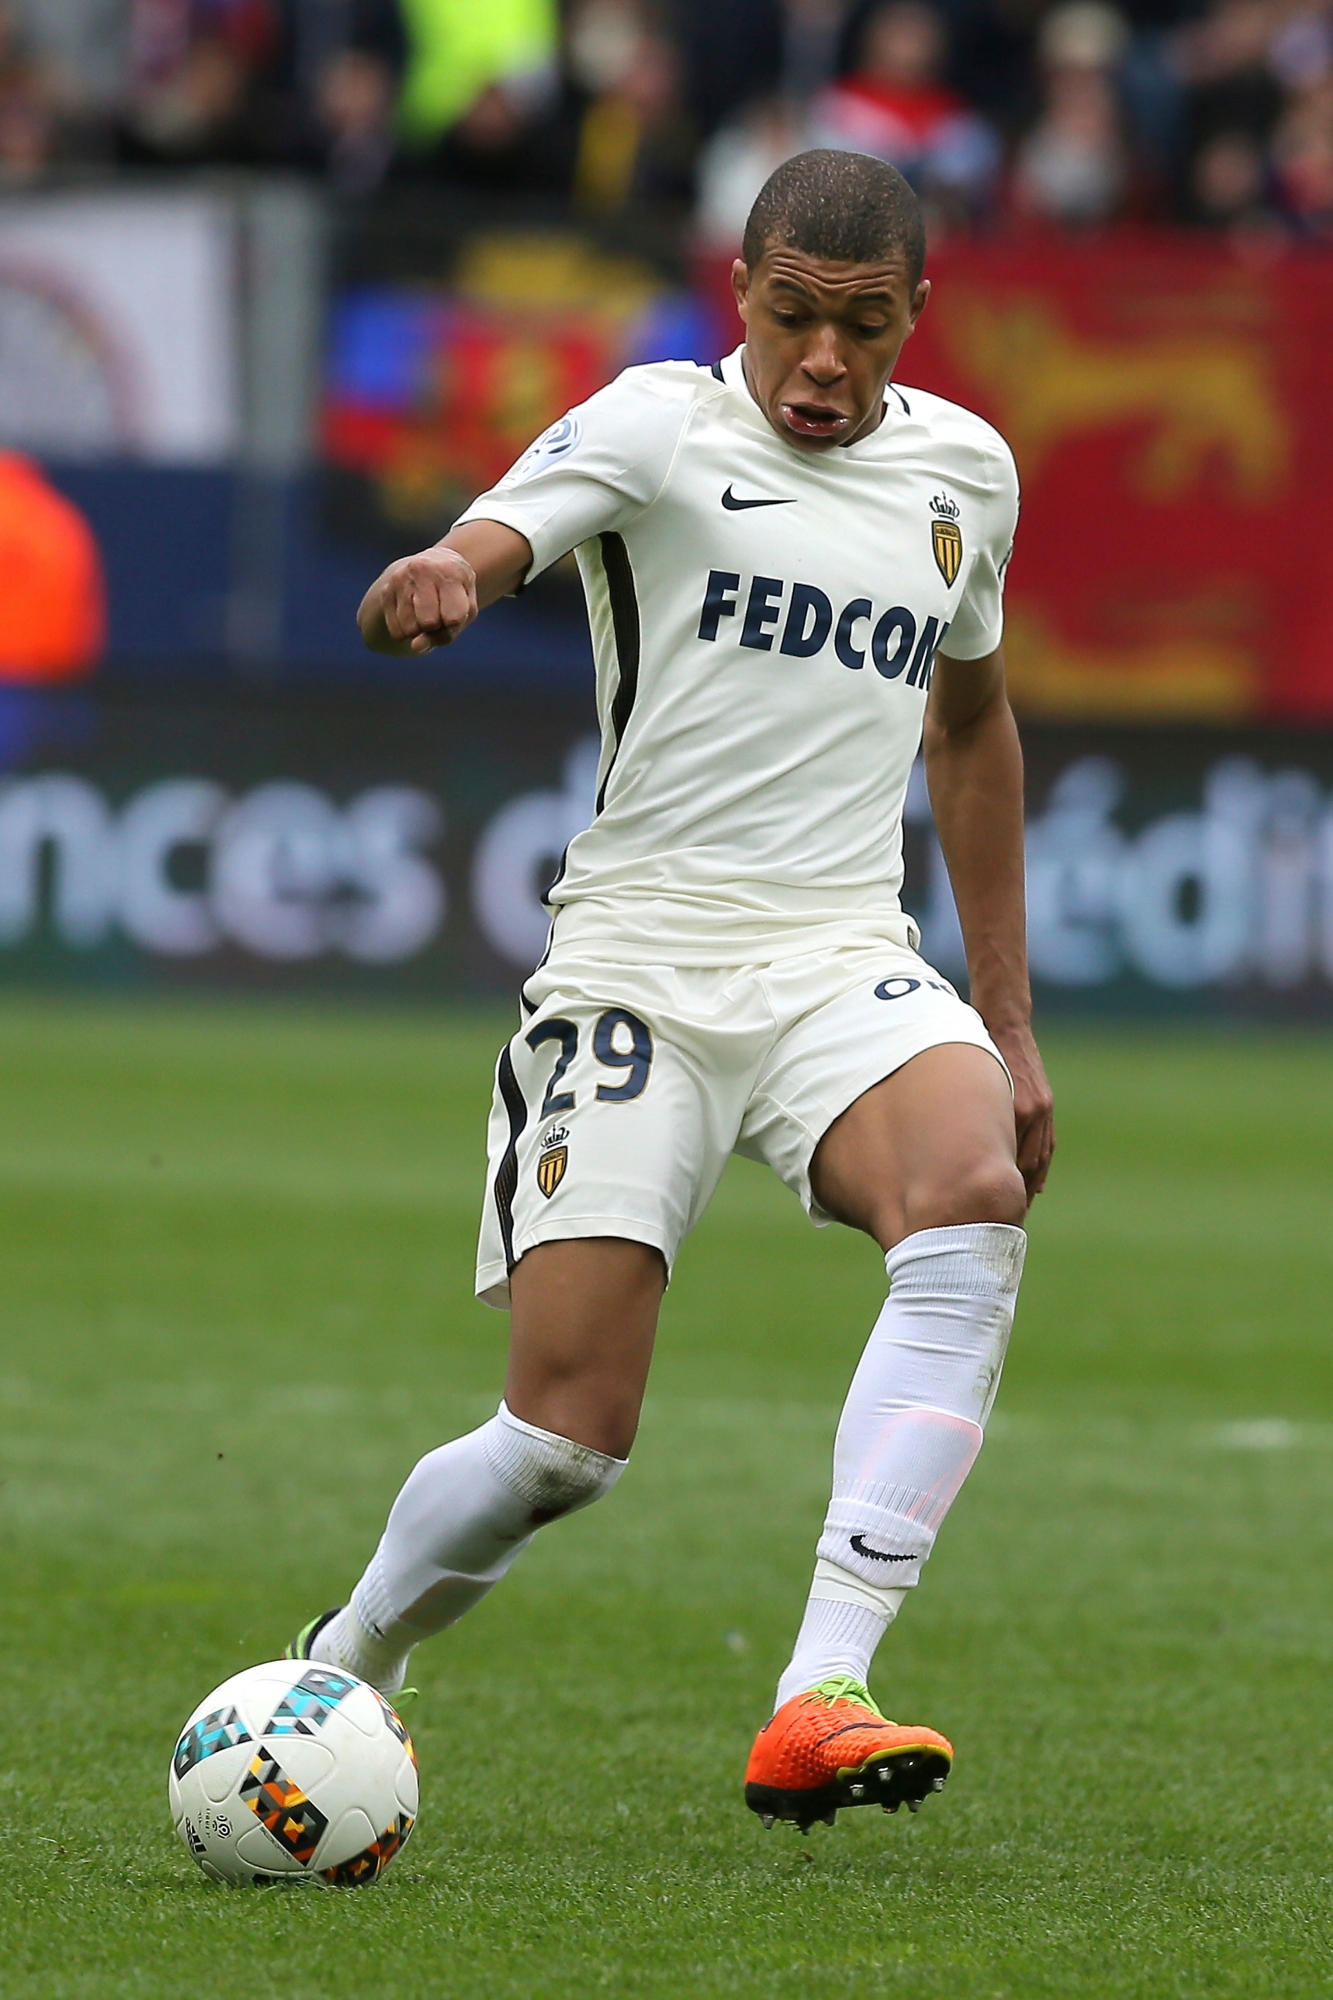 Monaco's Kylian Mbappe dribbles the ball during his French League One soccer match against Caen, in Caen, north western France, Sunday, March 19, 2017. Monaco won 3-0. (AP Photo/David Vincent)Kevin Mbappe FRANCE SOCCER LEAGUE ONE